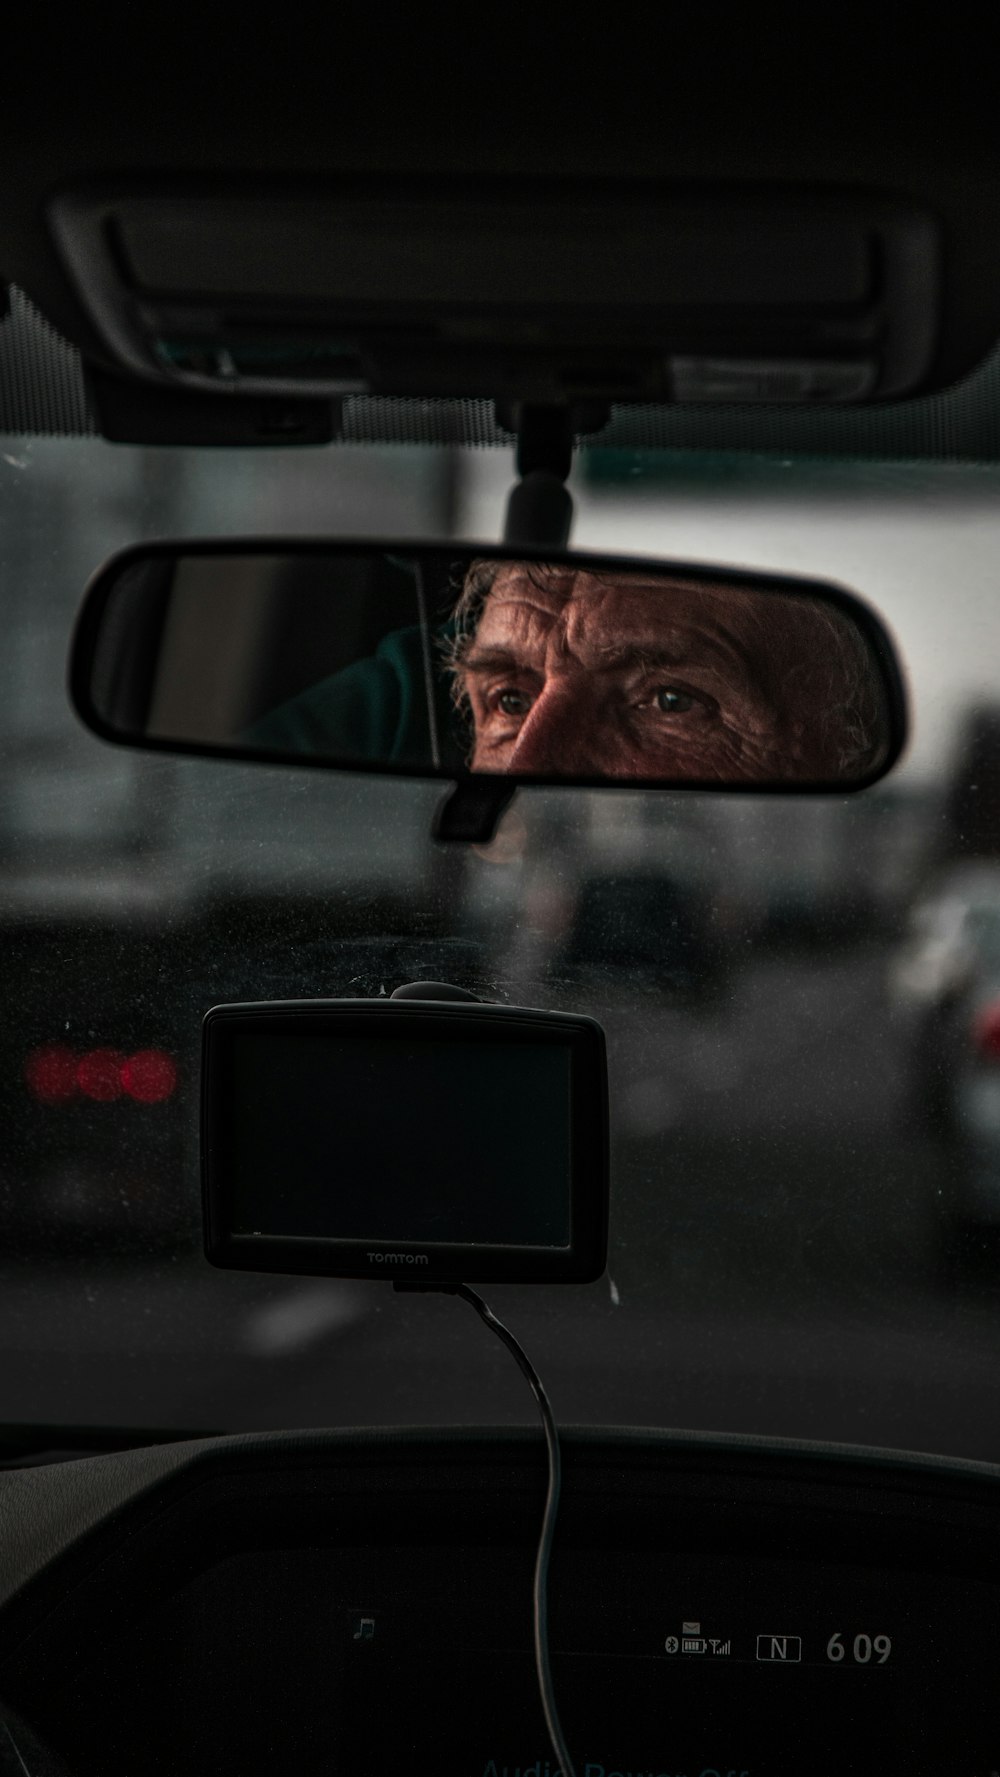 rear view mirror with man's eyes reflection